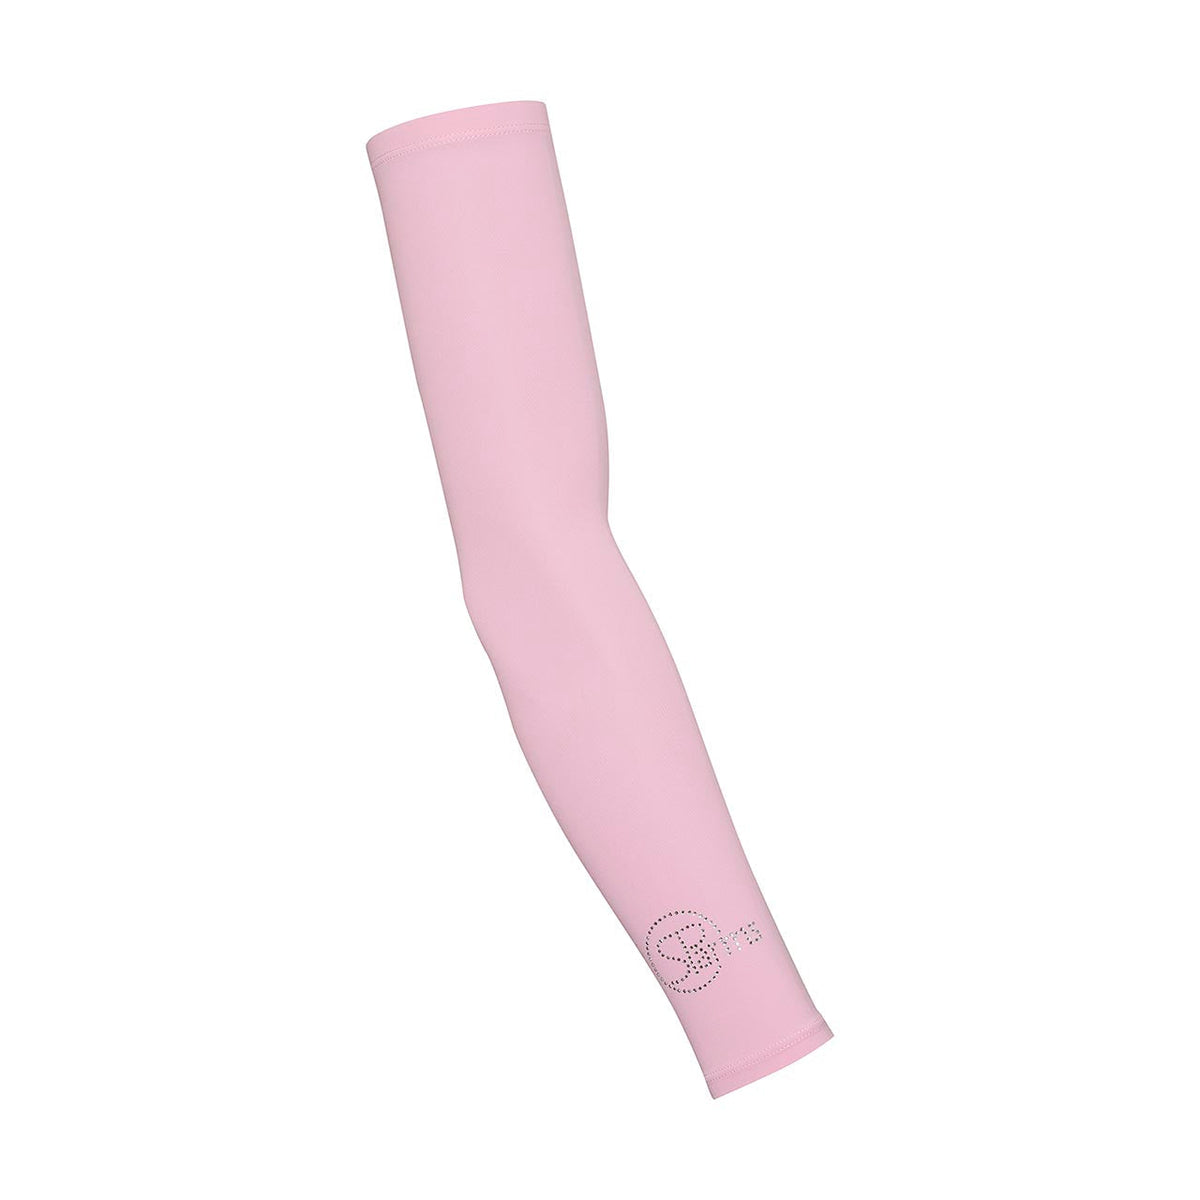 SParms pink arm sleeve